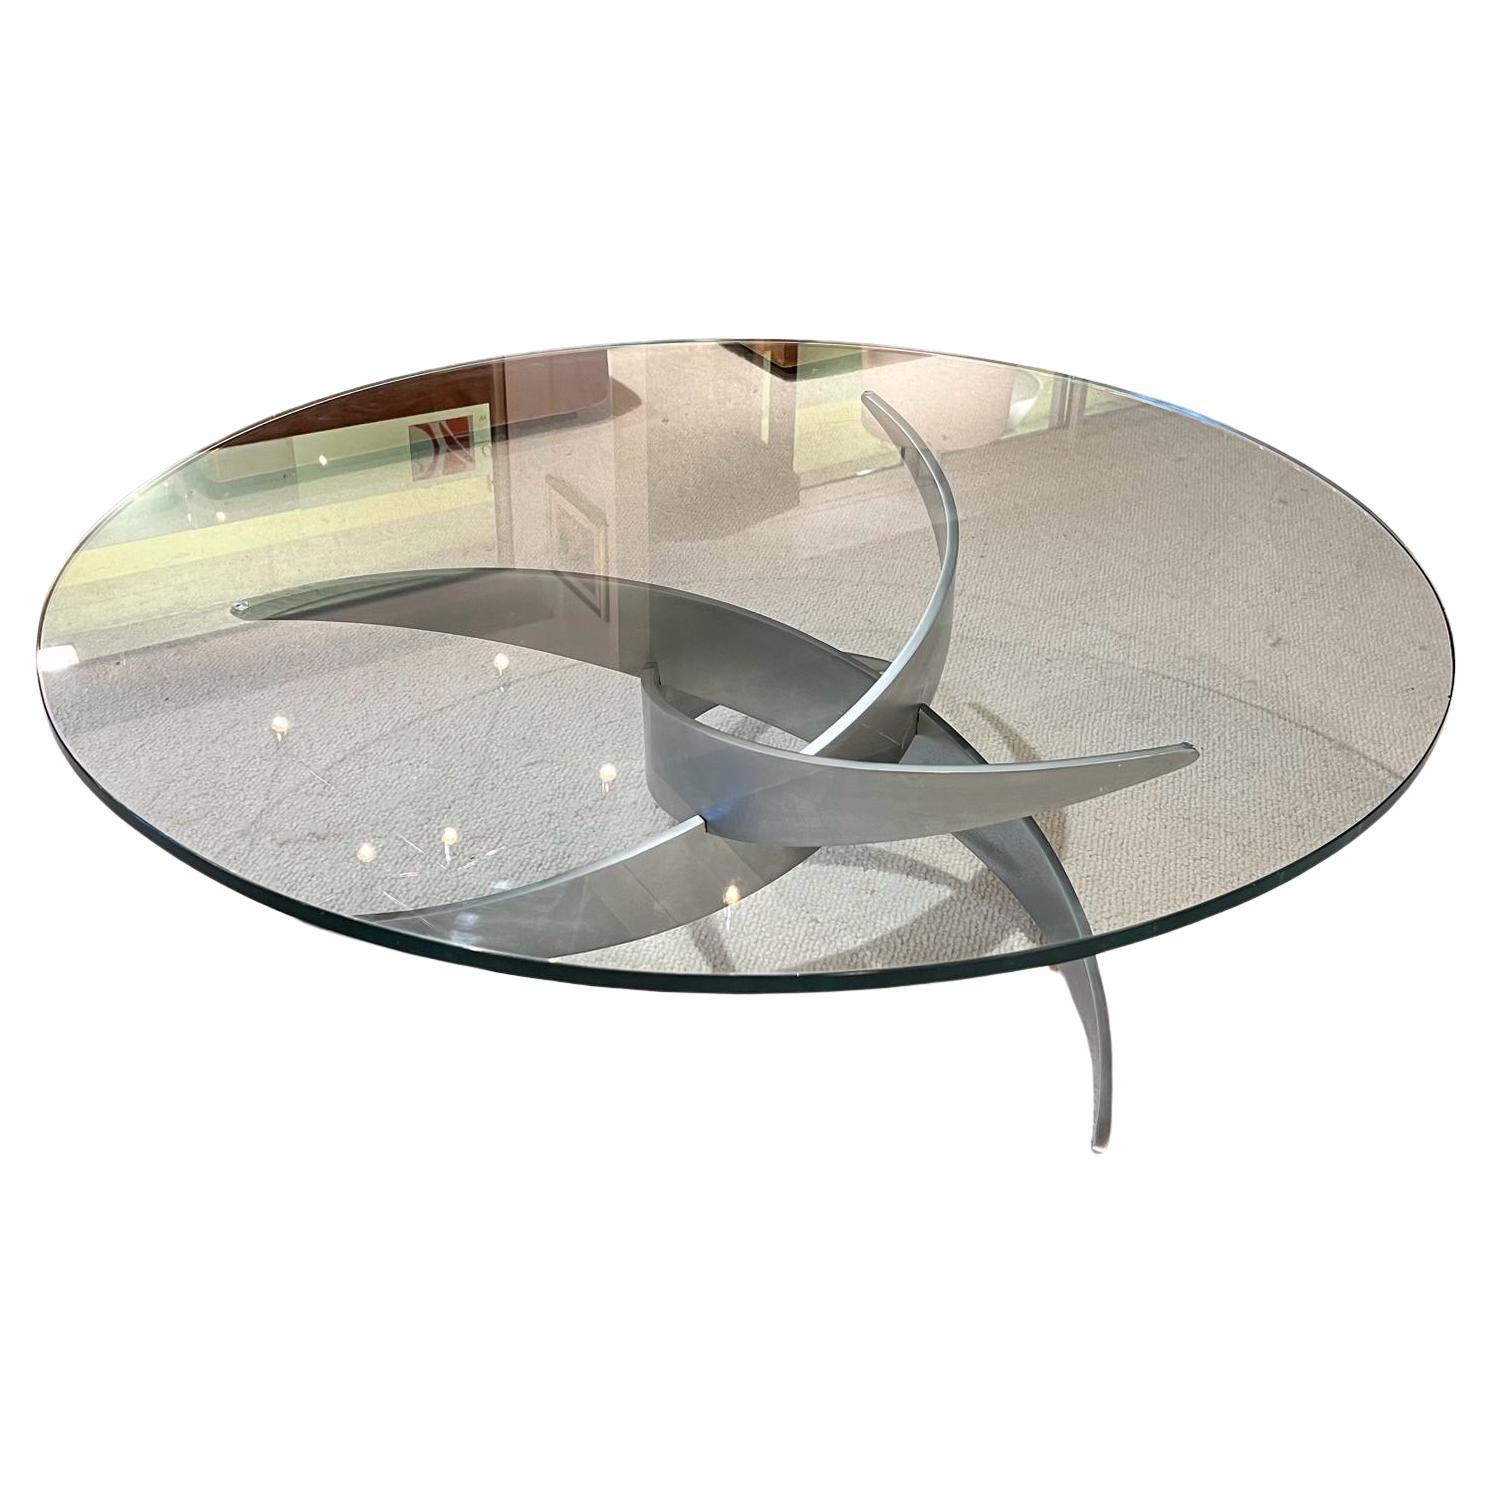 70s Coffee Table
Stainless steel and glass coffee table
France 1970
Dim: 110 cm
Height: 35 cm